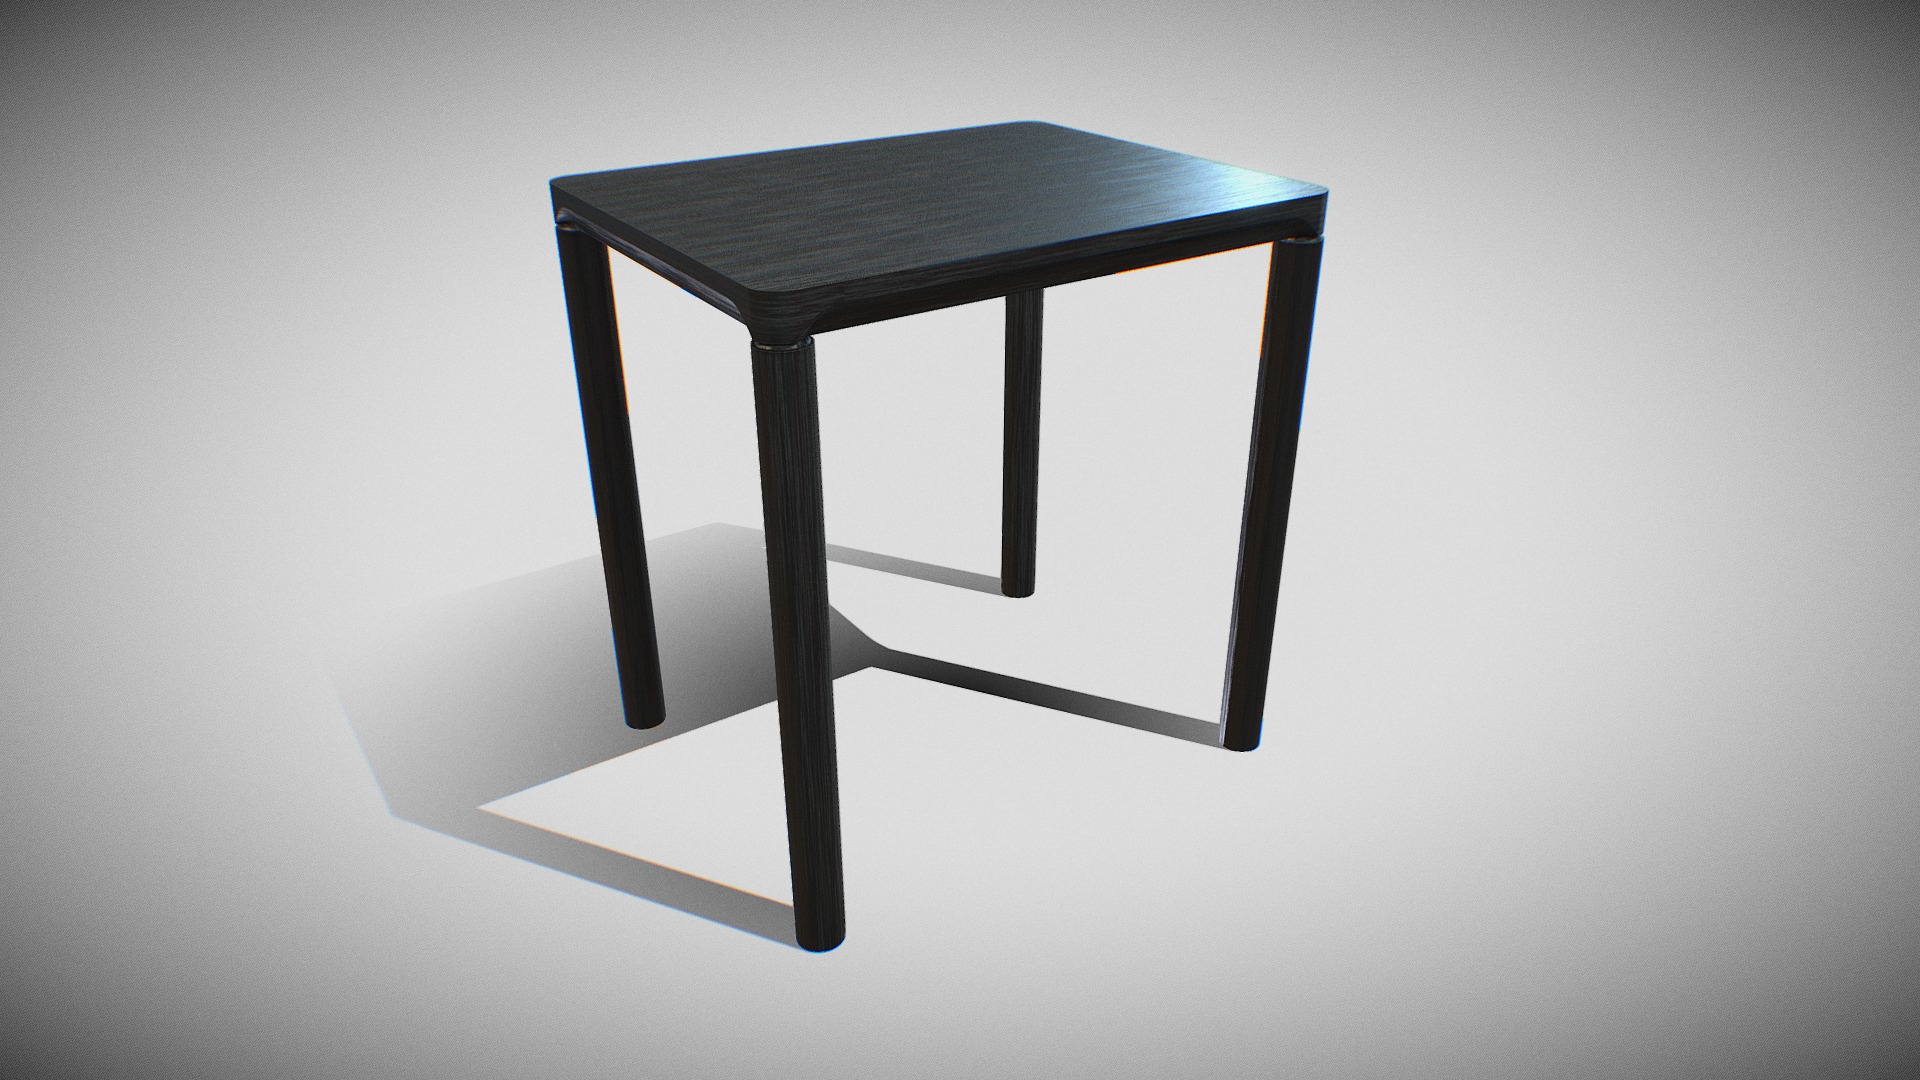 3D model Piloti Table-Black lacquered wood - This is a 3D model of the Piloti Table-Black lacquered wood. The 3D model is about a small black table.